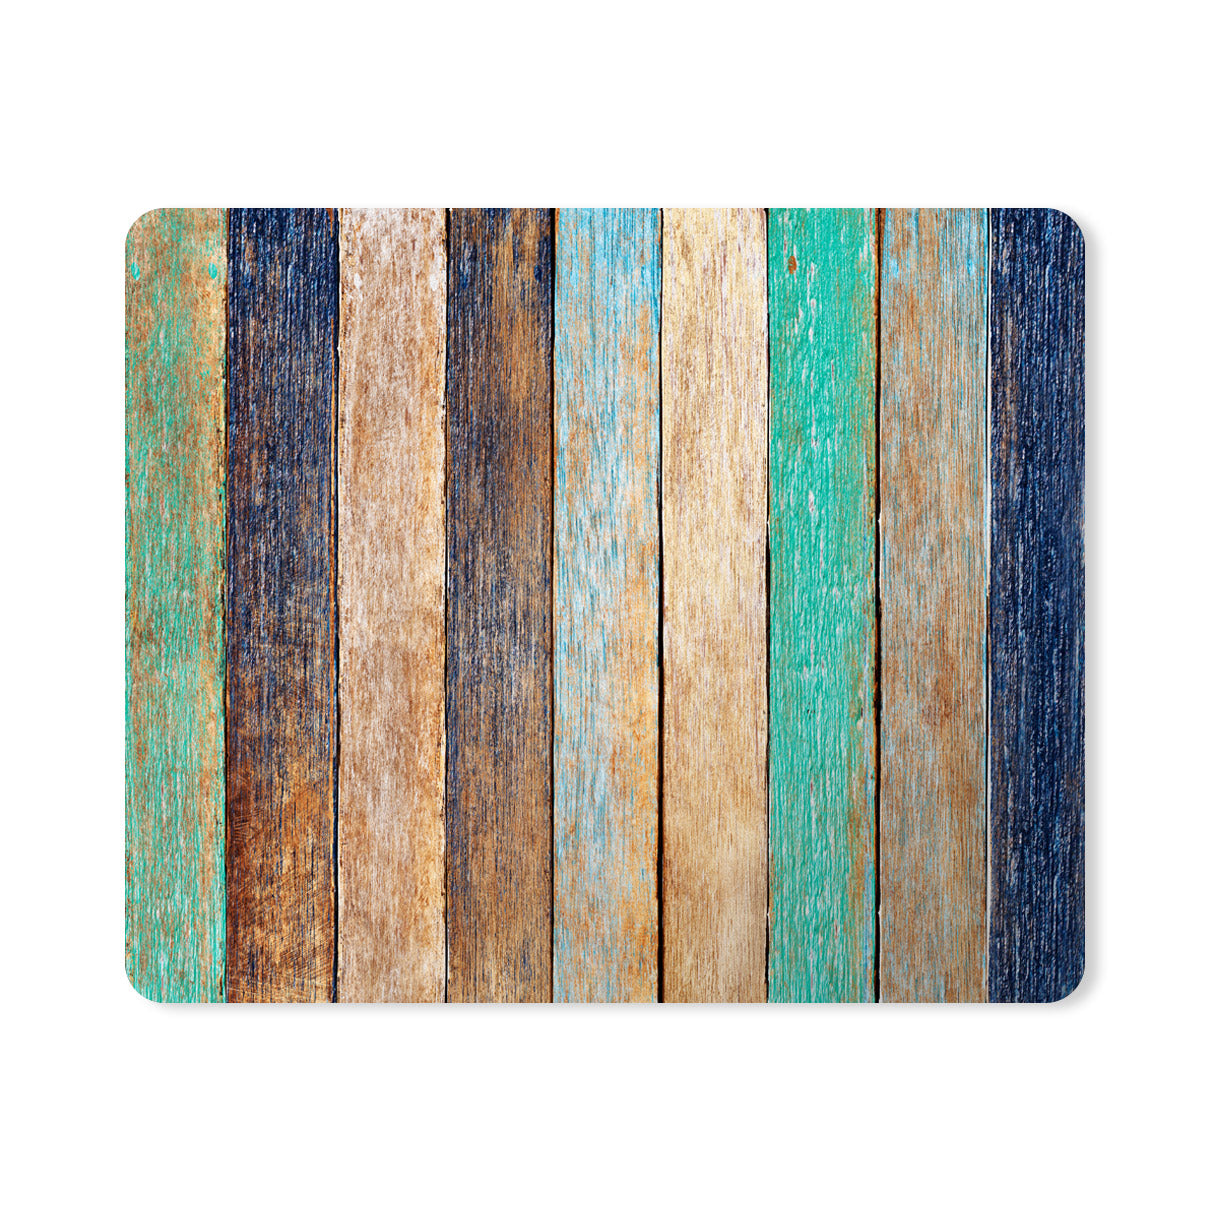 Colorful Wood Pattern Designer Printed Premium Mouse pad (9 in x 7.5 in)